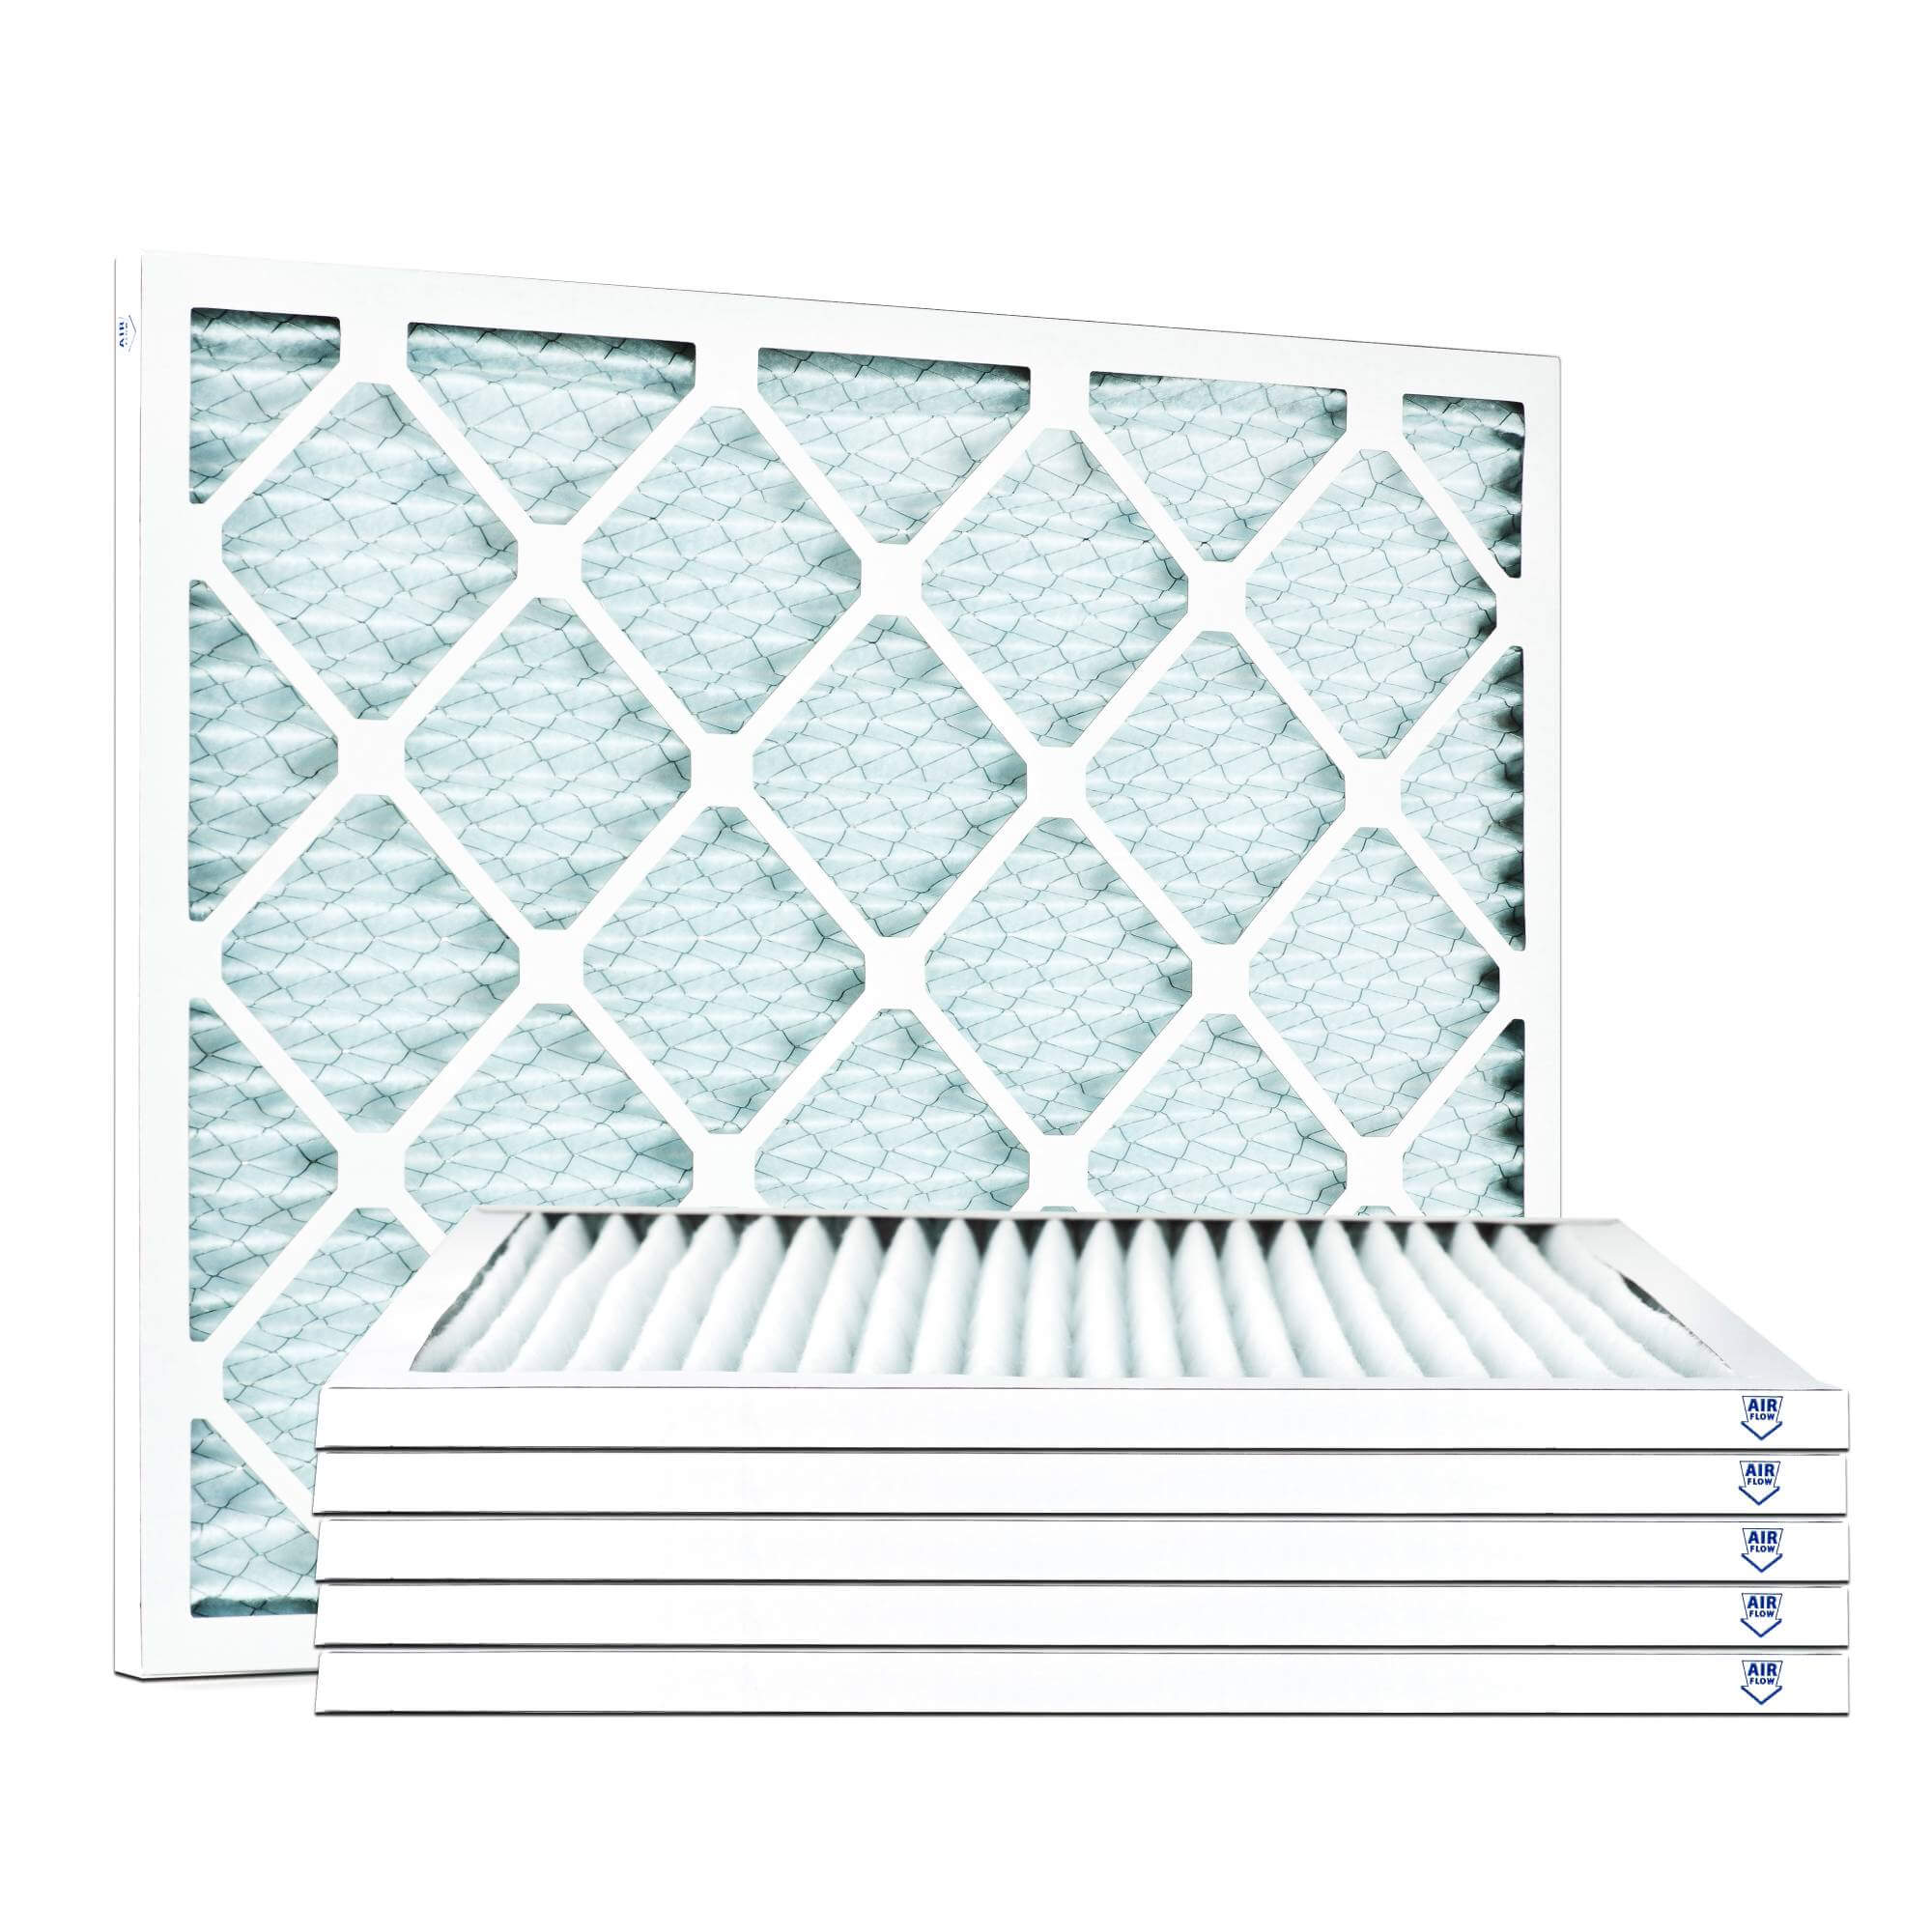 1" MERV 11 Furnace & AC Air Filter by Filters Fast&reg; - 6-Pack thumbnail